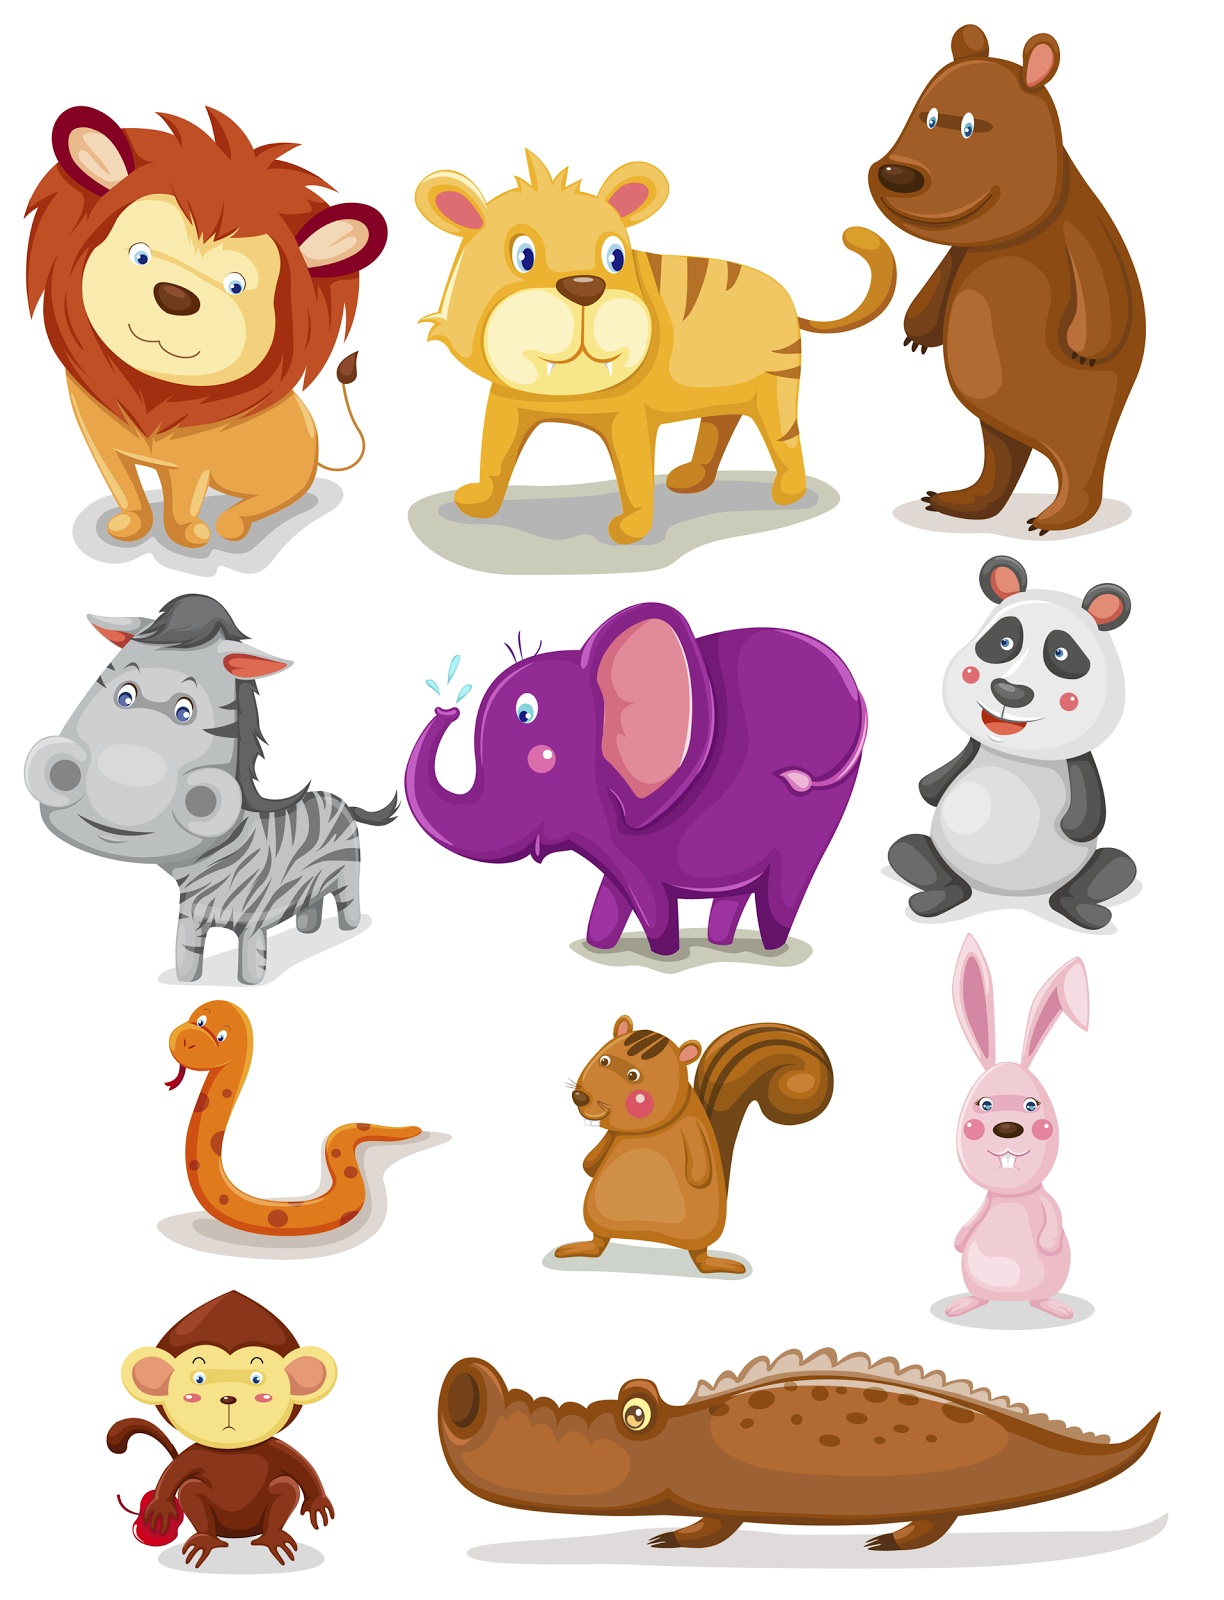 Images Of Wild Animals For Kids